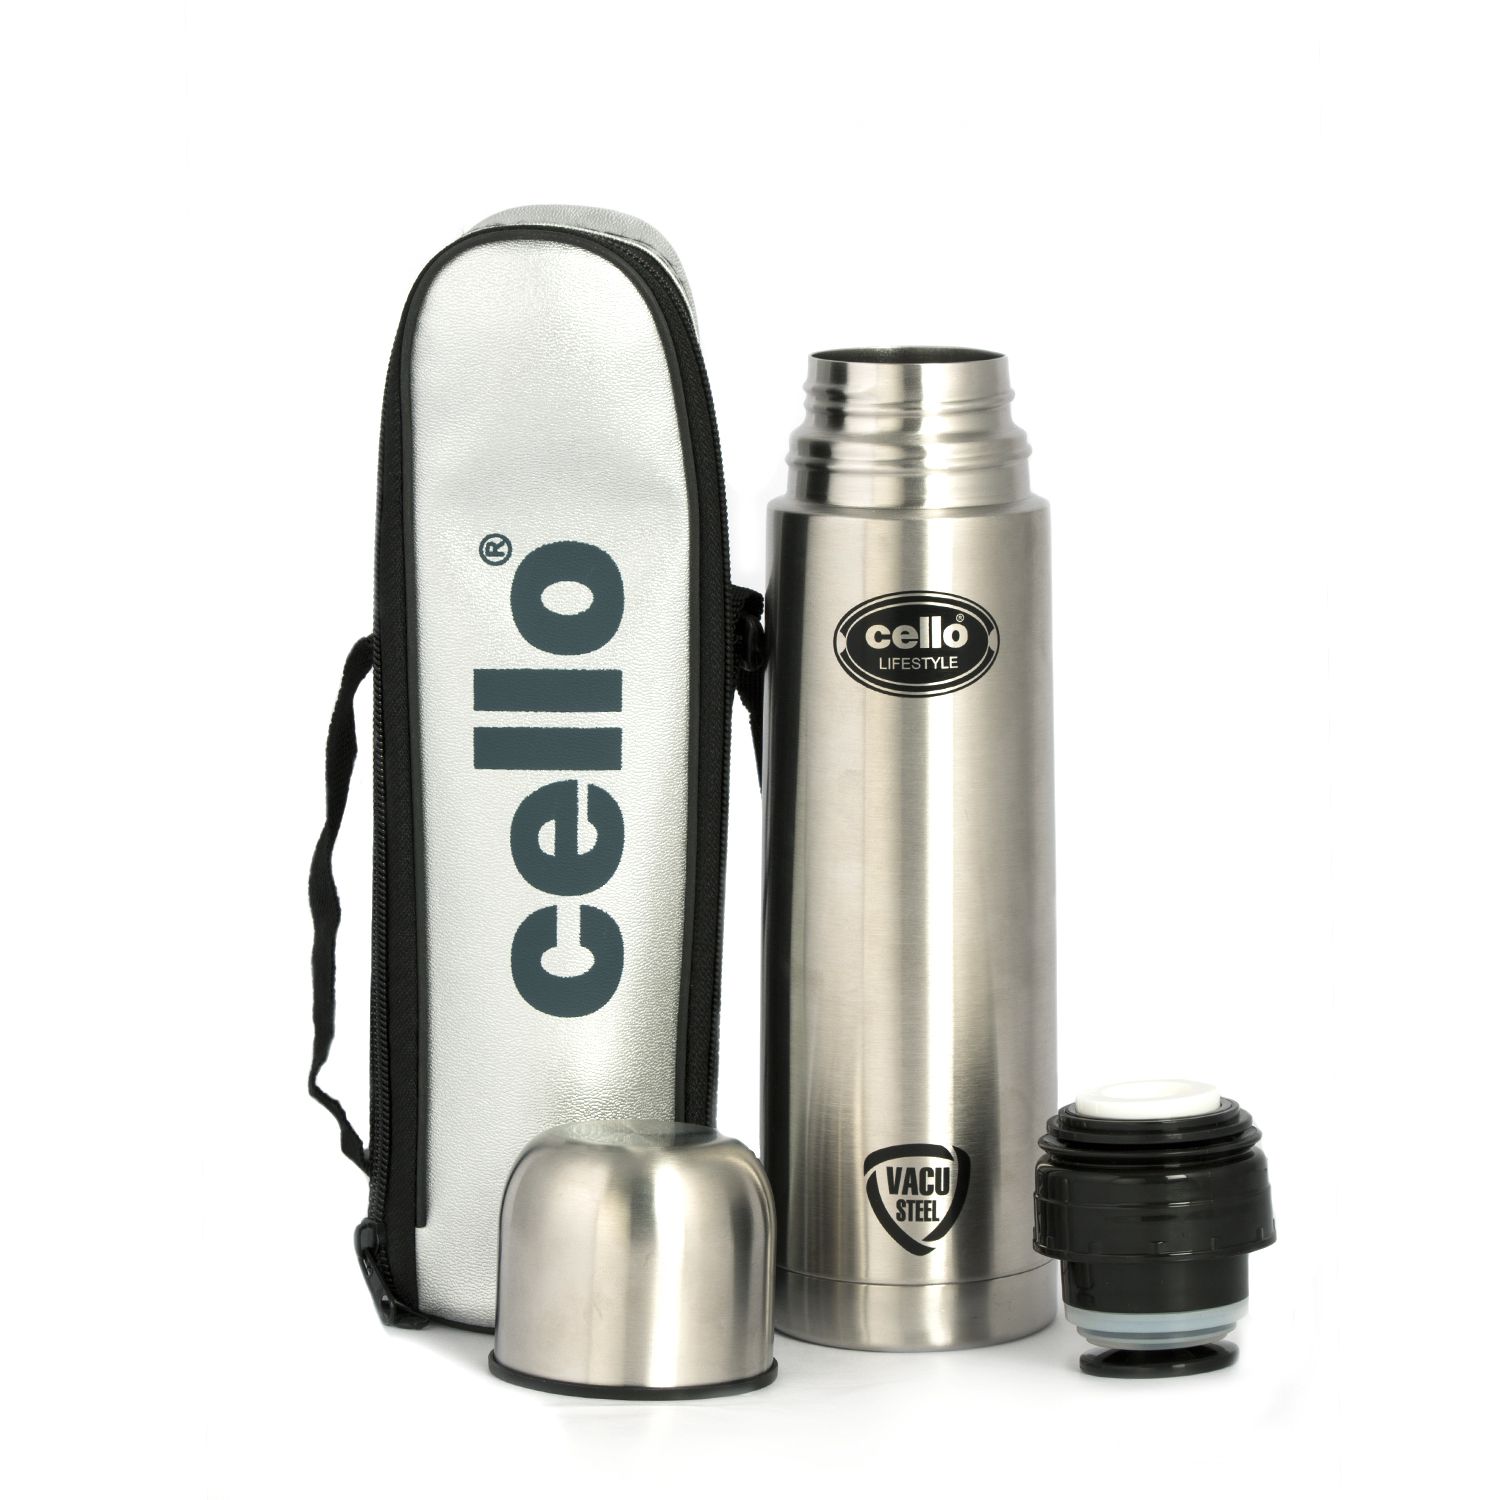 Cello Lifestyle Stainless Steel Flask 1000ml